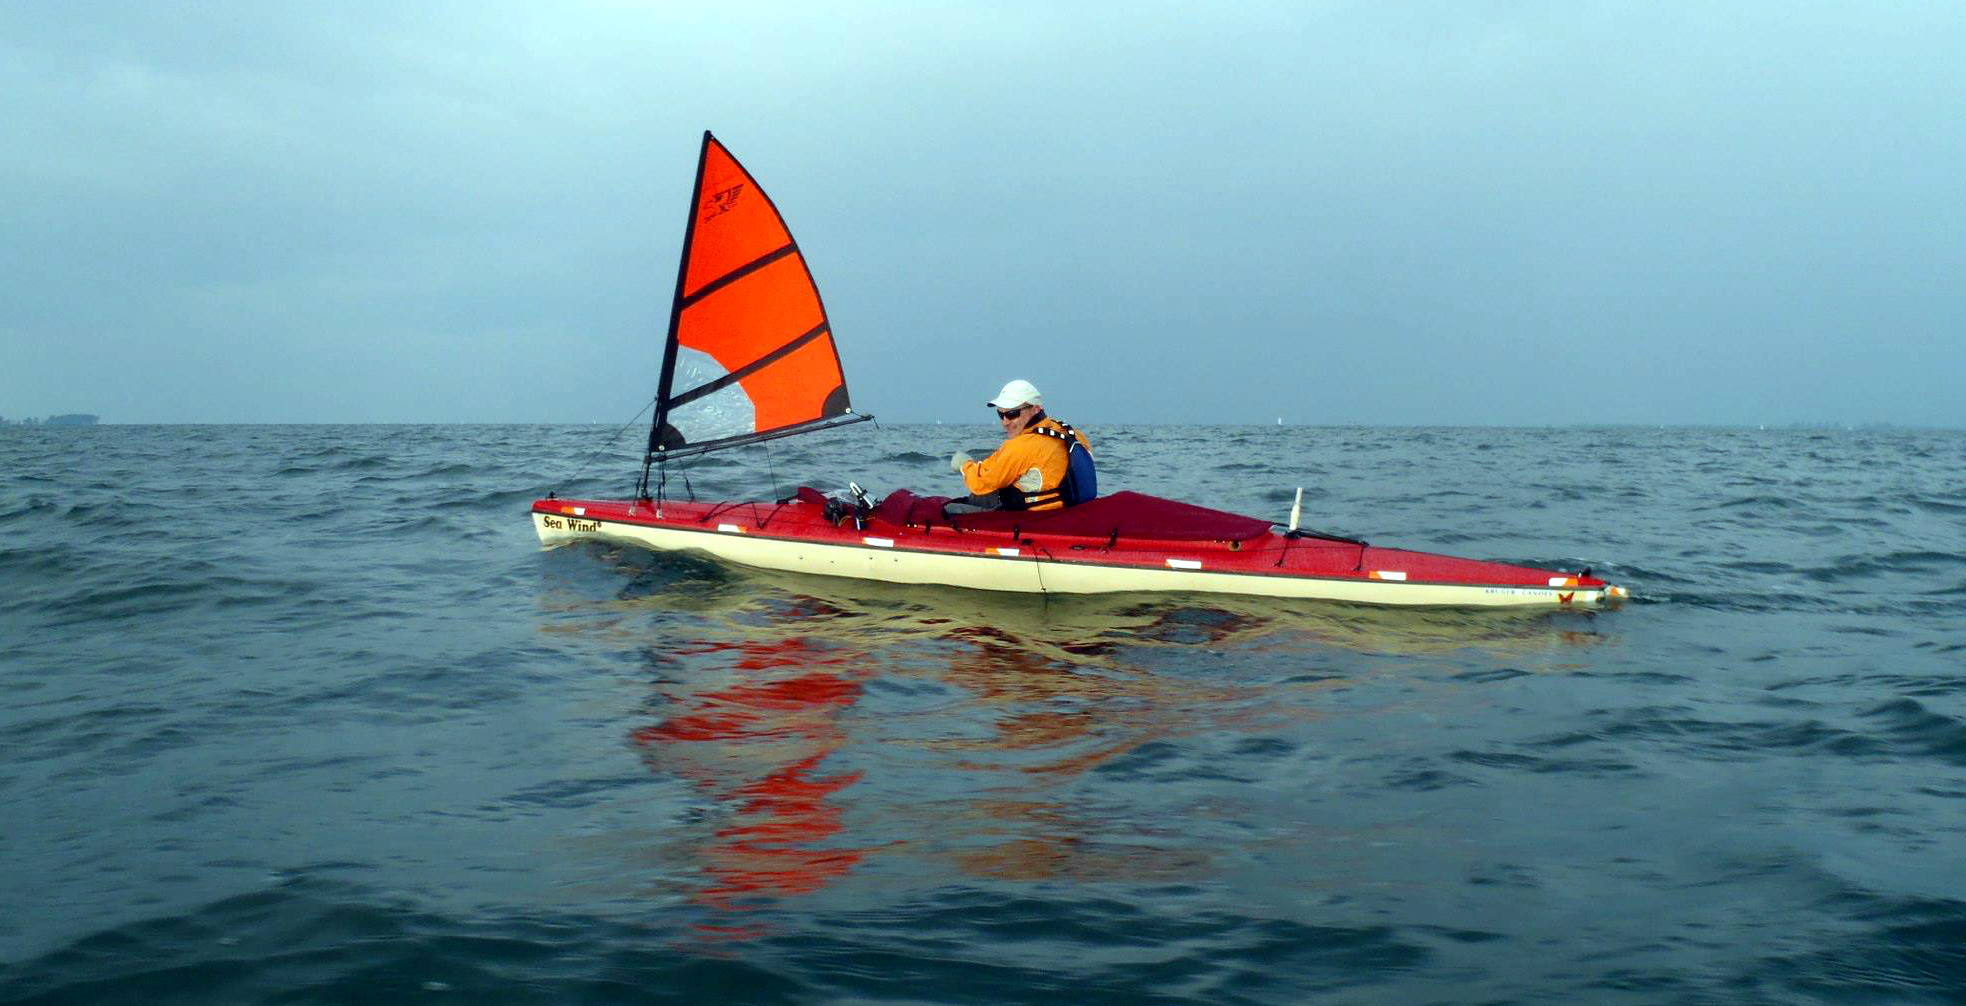  sailing with his Falcon Sail during the 2013 Everglades Challenge